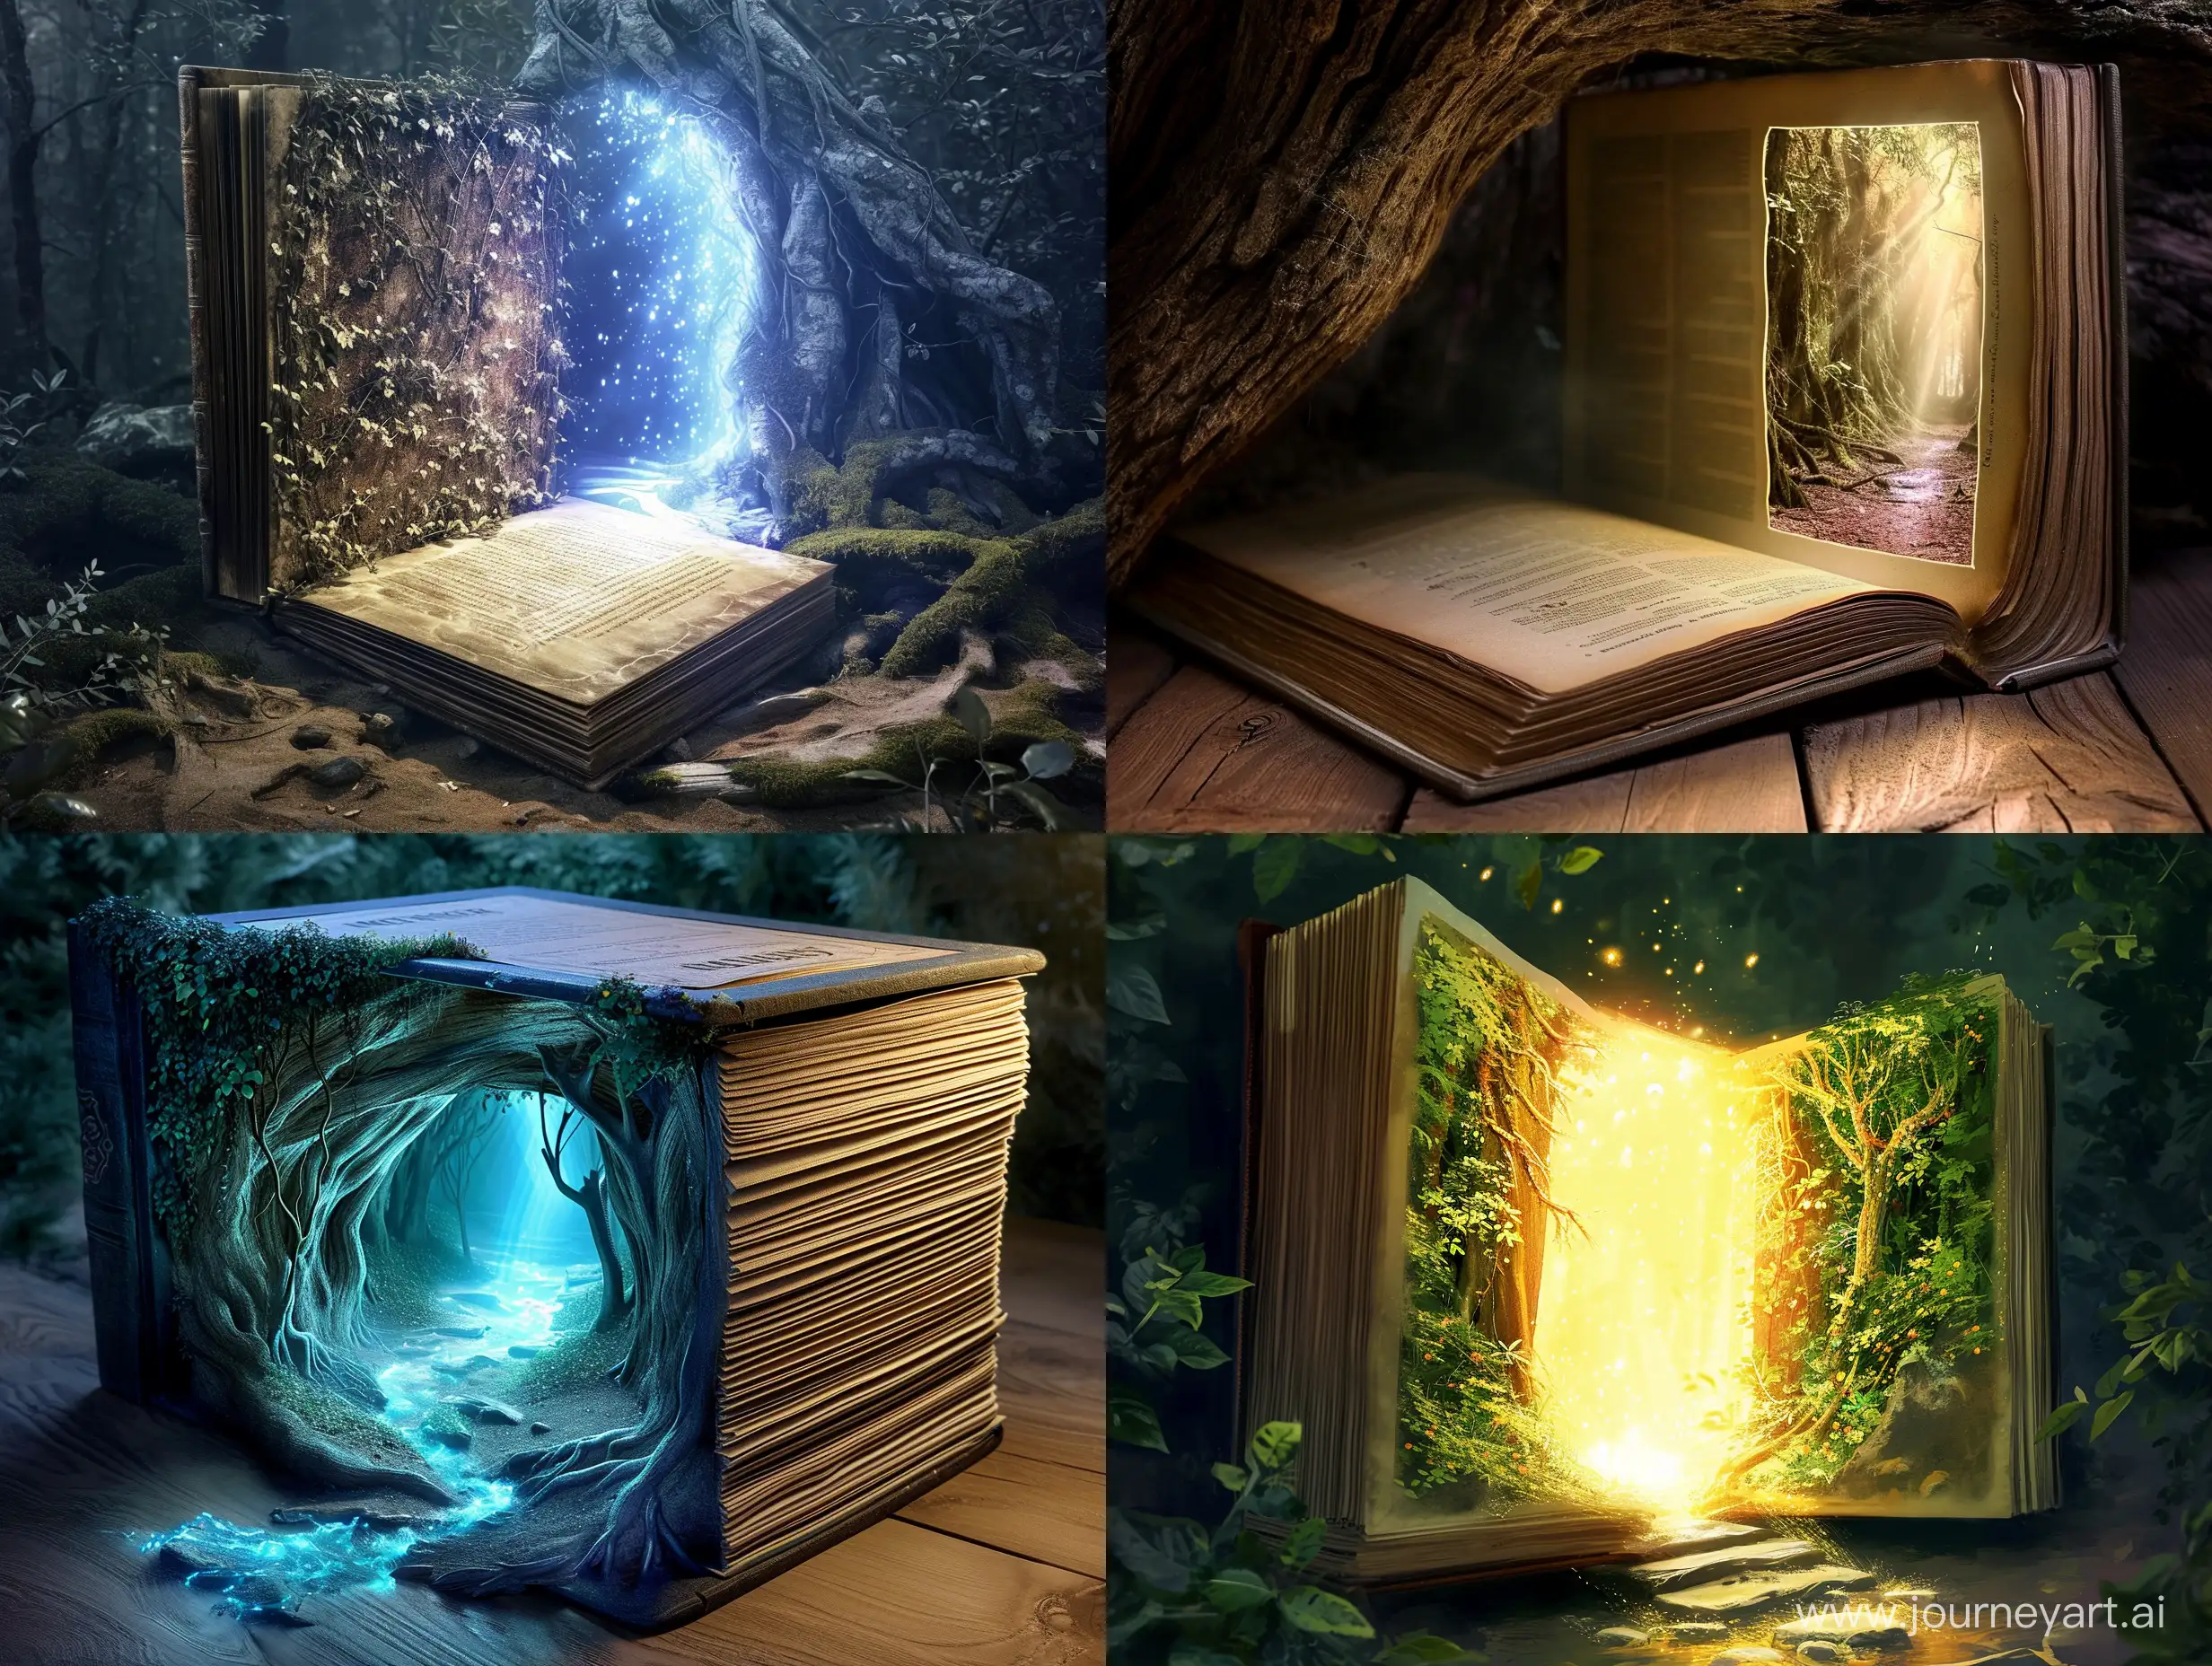 Enchanting-Portal-to-an-Ancient-Forest-Revealed-Through-Magical-Book-Pages